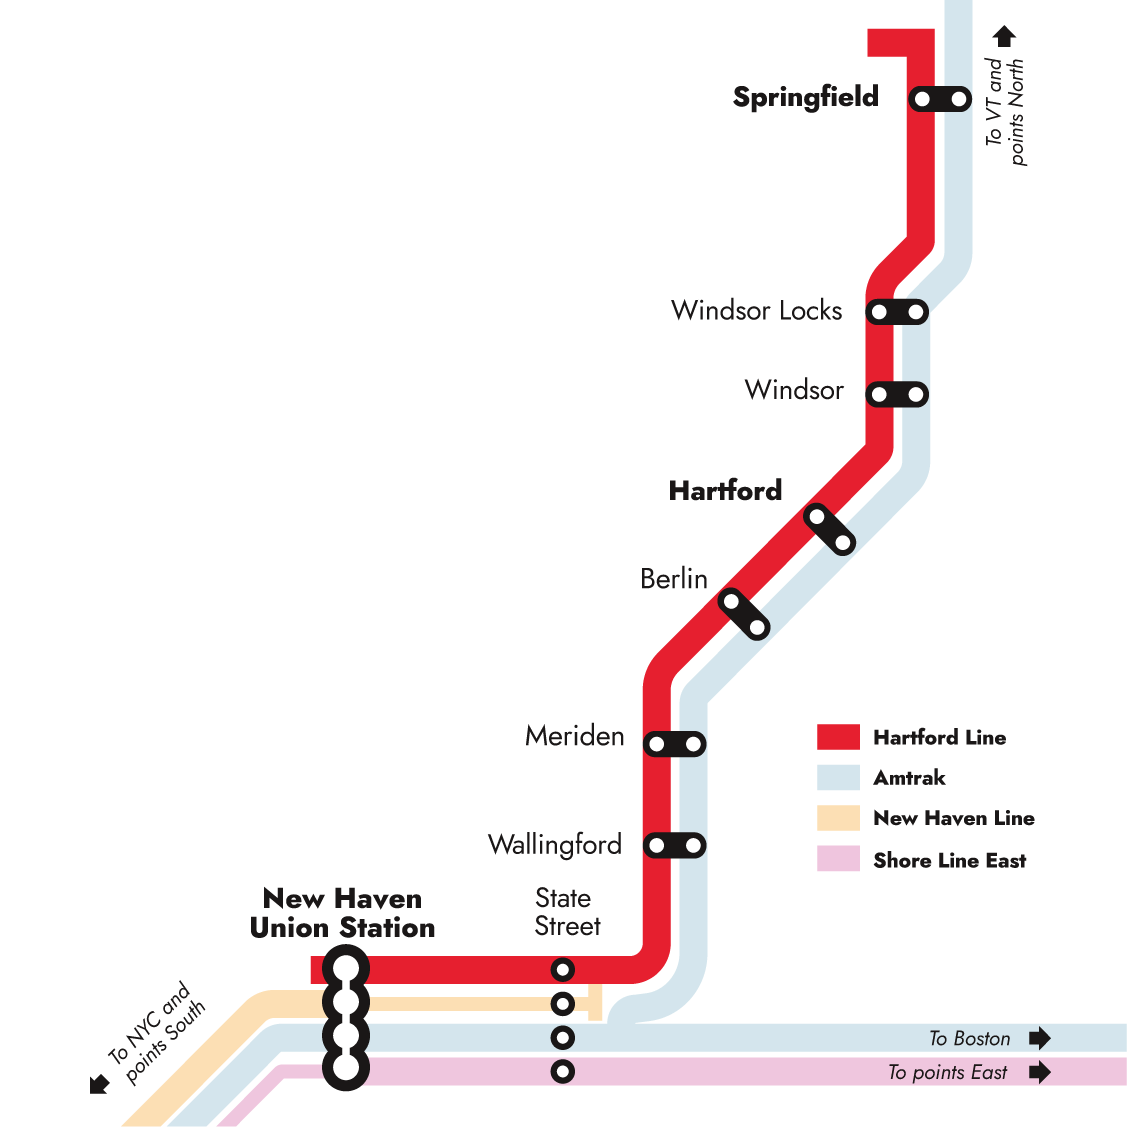 An image depicting the Hartford Line rail stops. Northern most stop is Springfield, moving south the line goes to Windosr Locks, Windsor, Hartford, Berlin, Meriden, Wallingford, State Street, and finally New haven Union Station. The Amtrak line follows the same stops as the Hartford Line. Connections to the New Haven Line and Shore Line East can be made at the State Street and New Haven Union Stations.